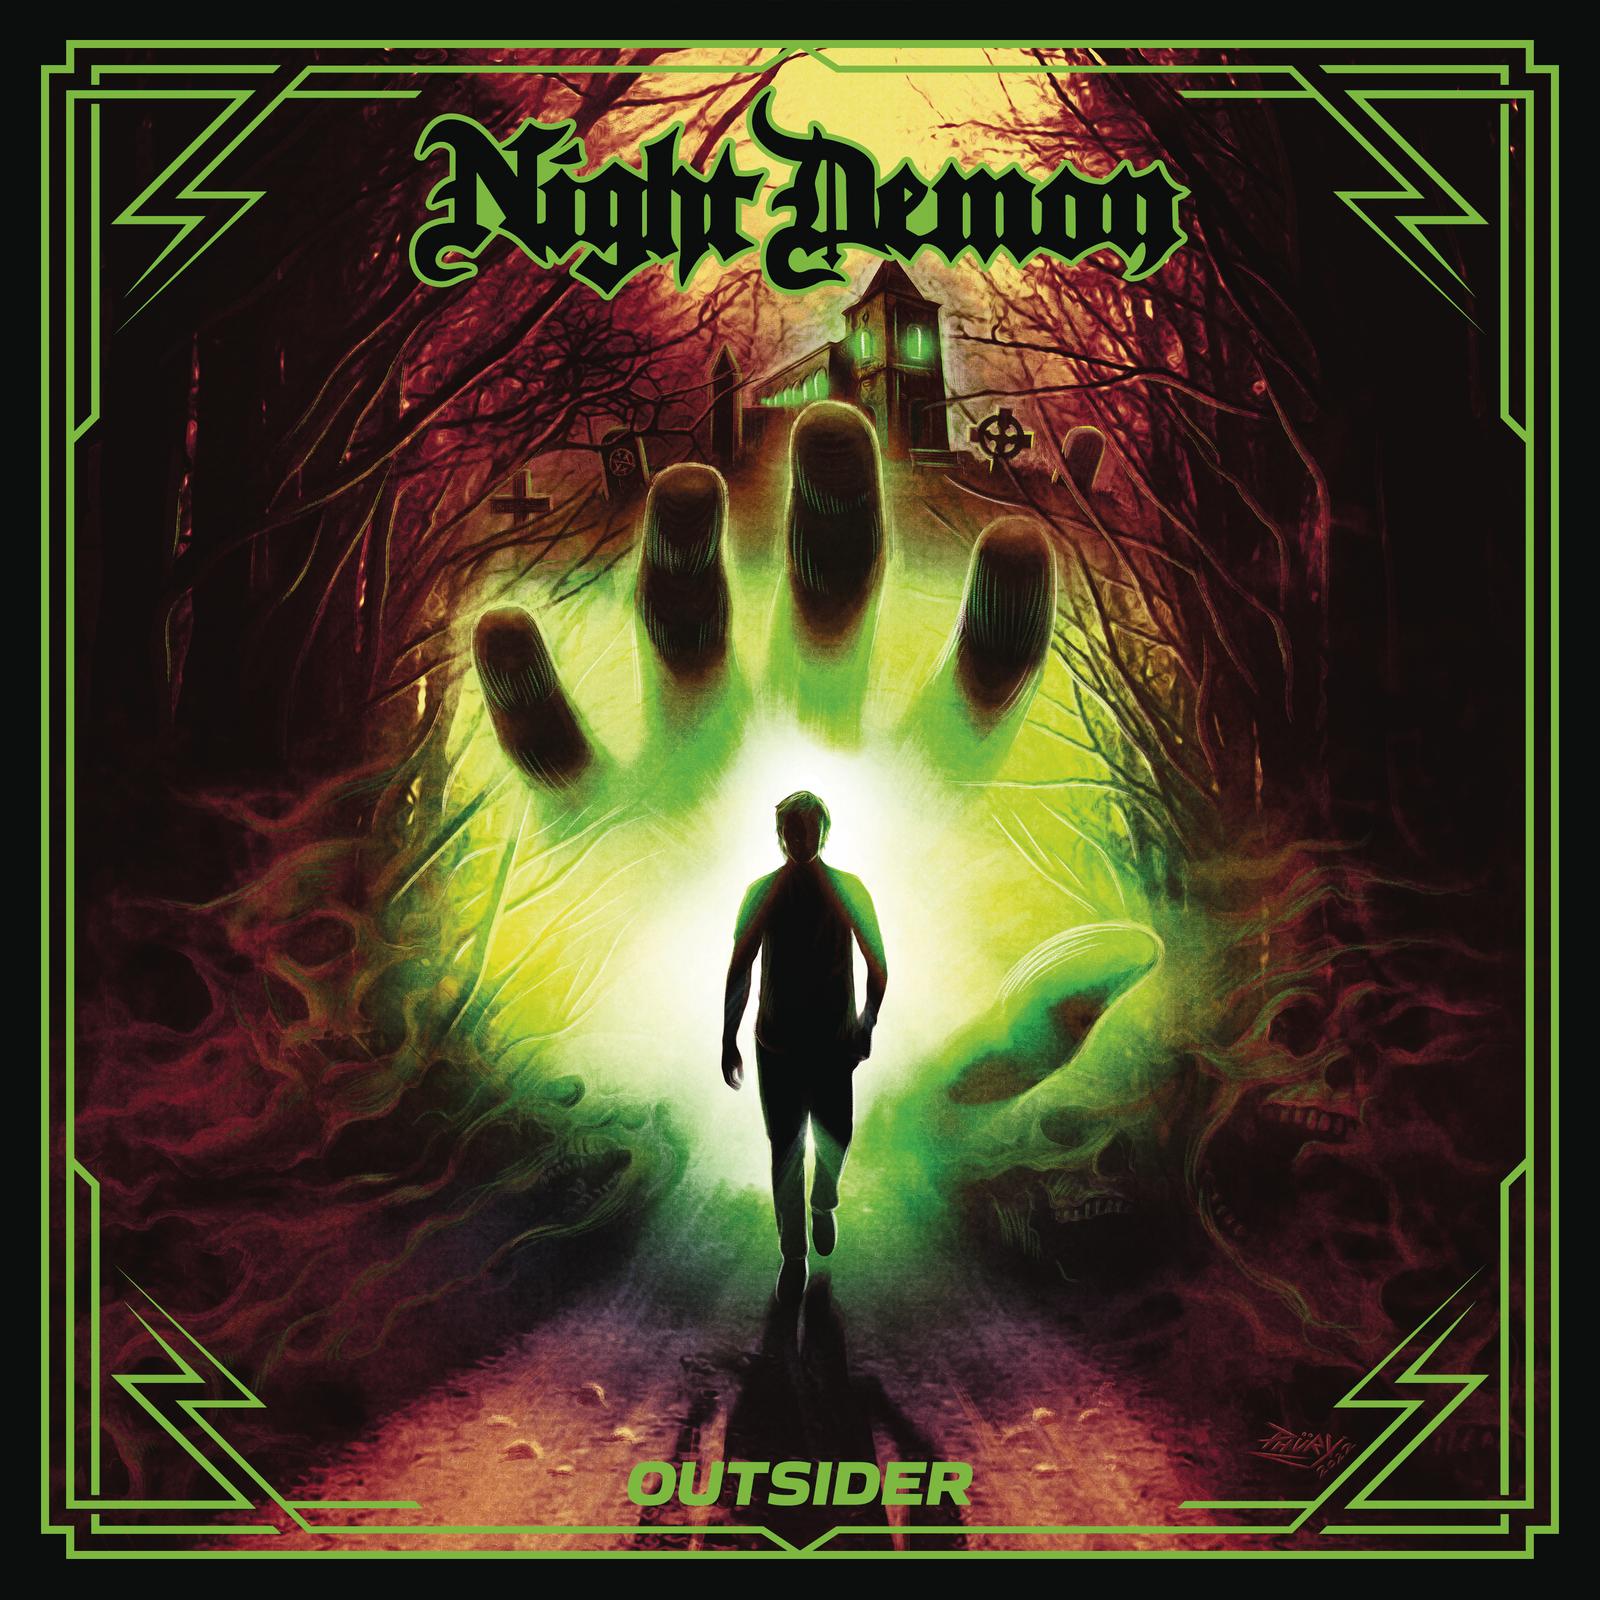 Night Demon - Escape From Beyond (clip)